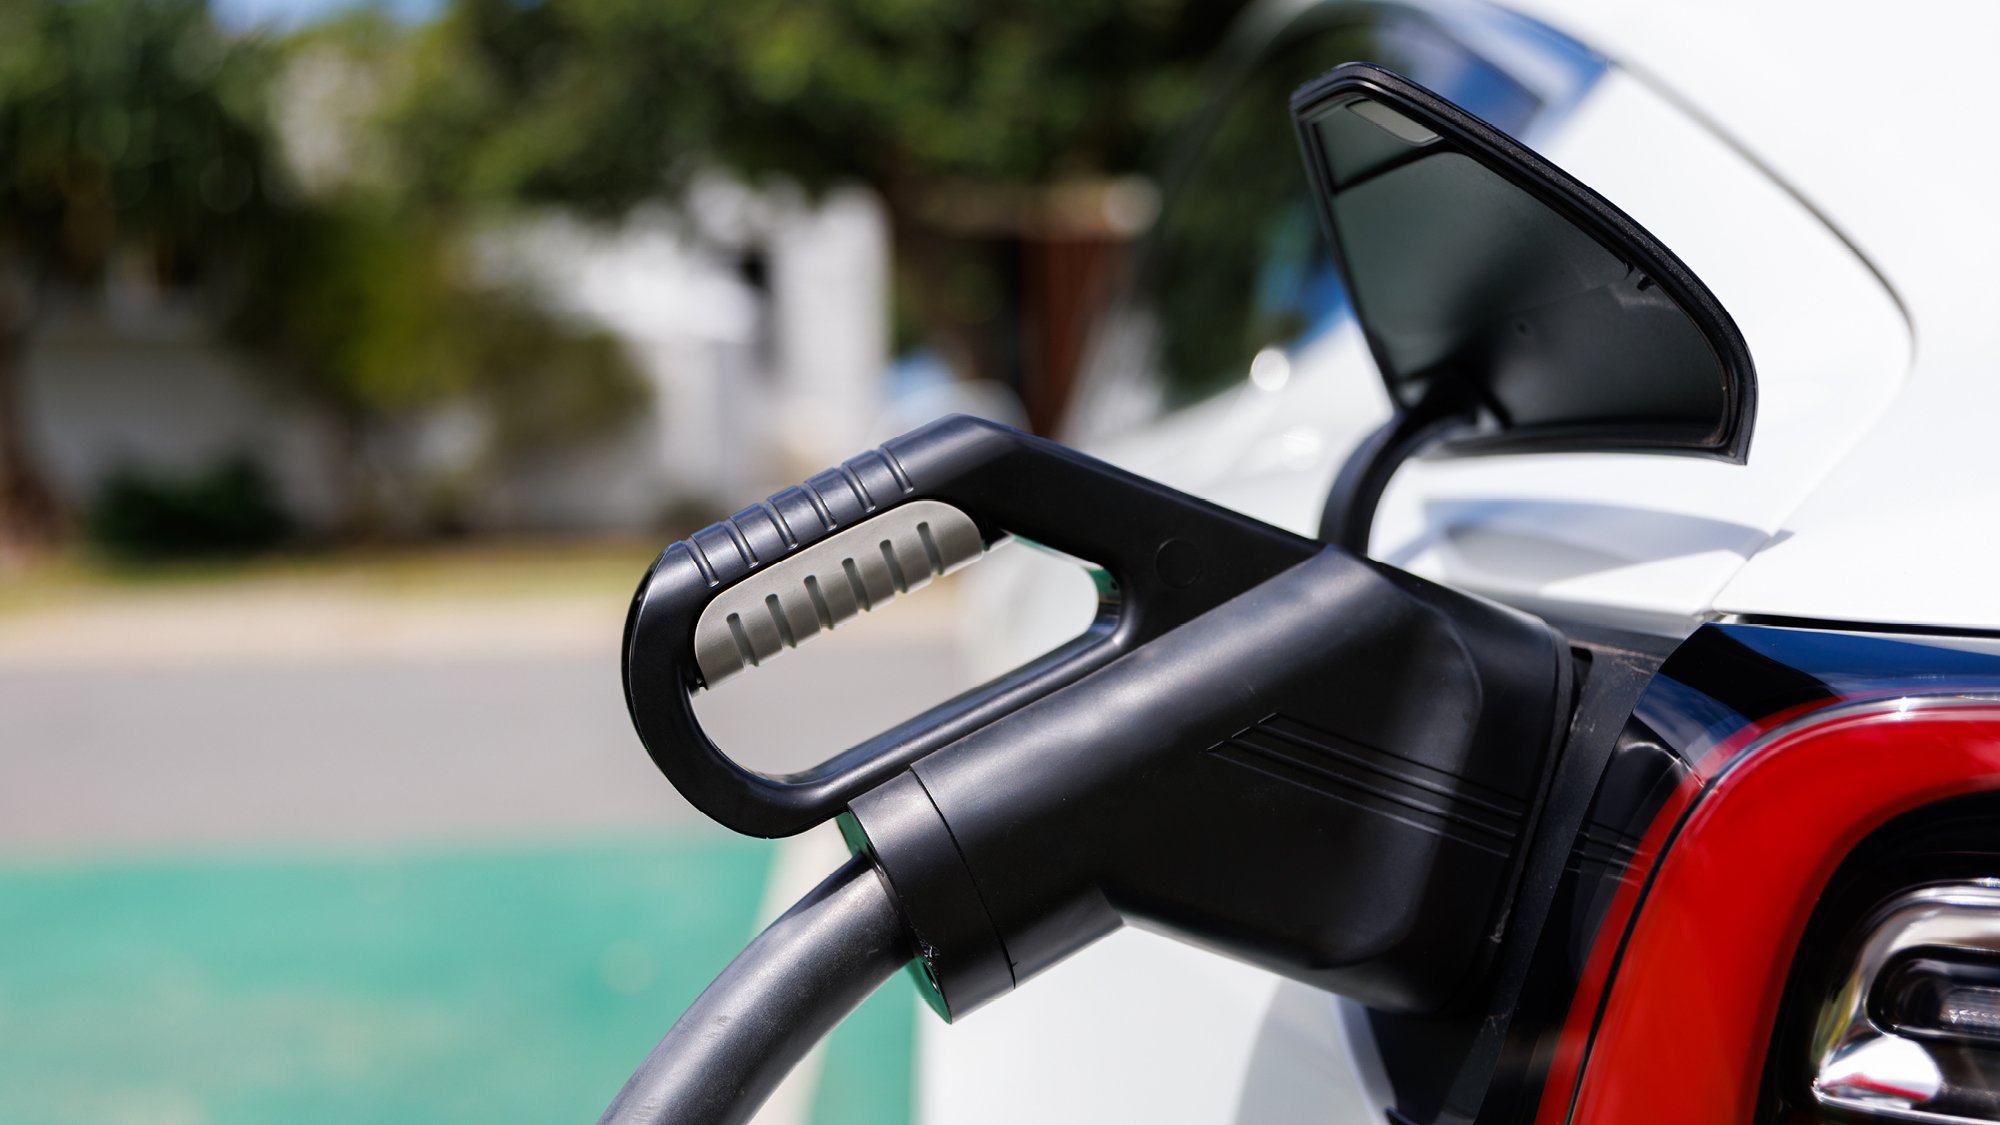 close up view of a white electric vehicle being charged